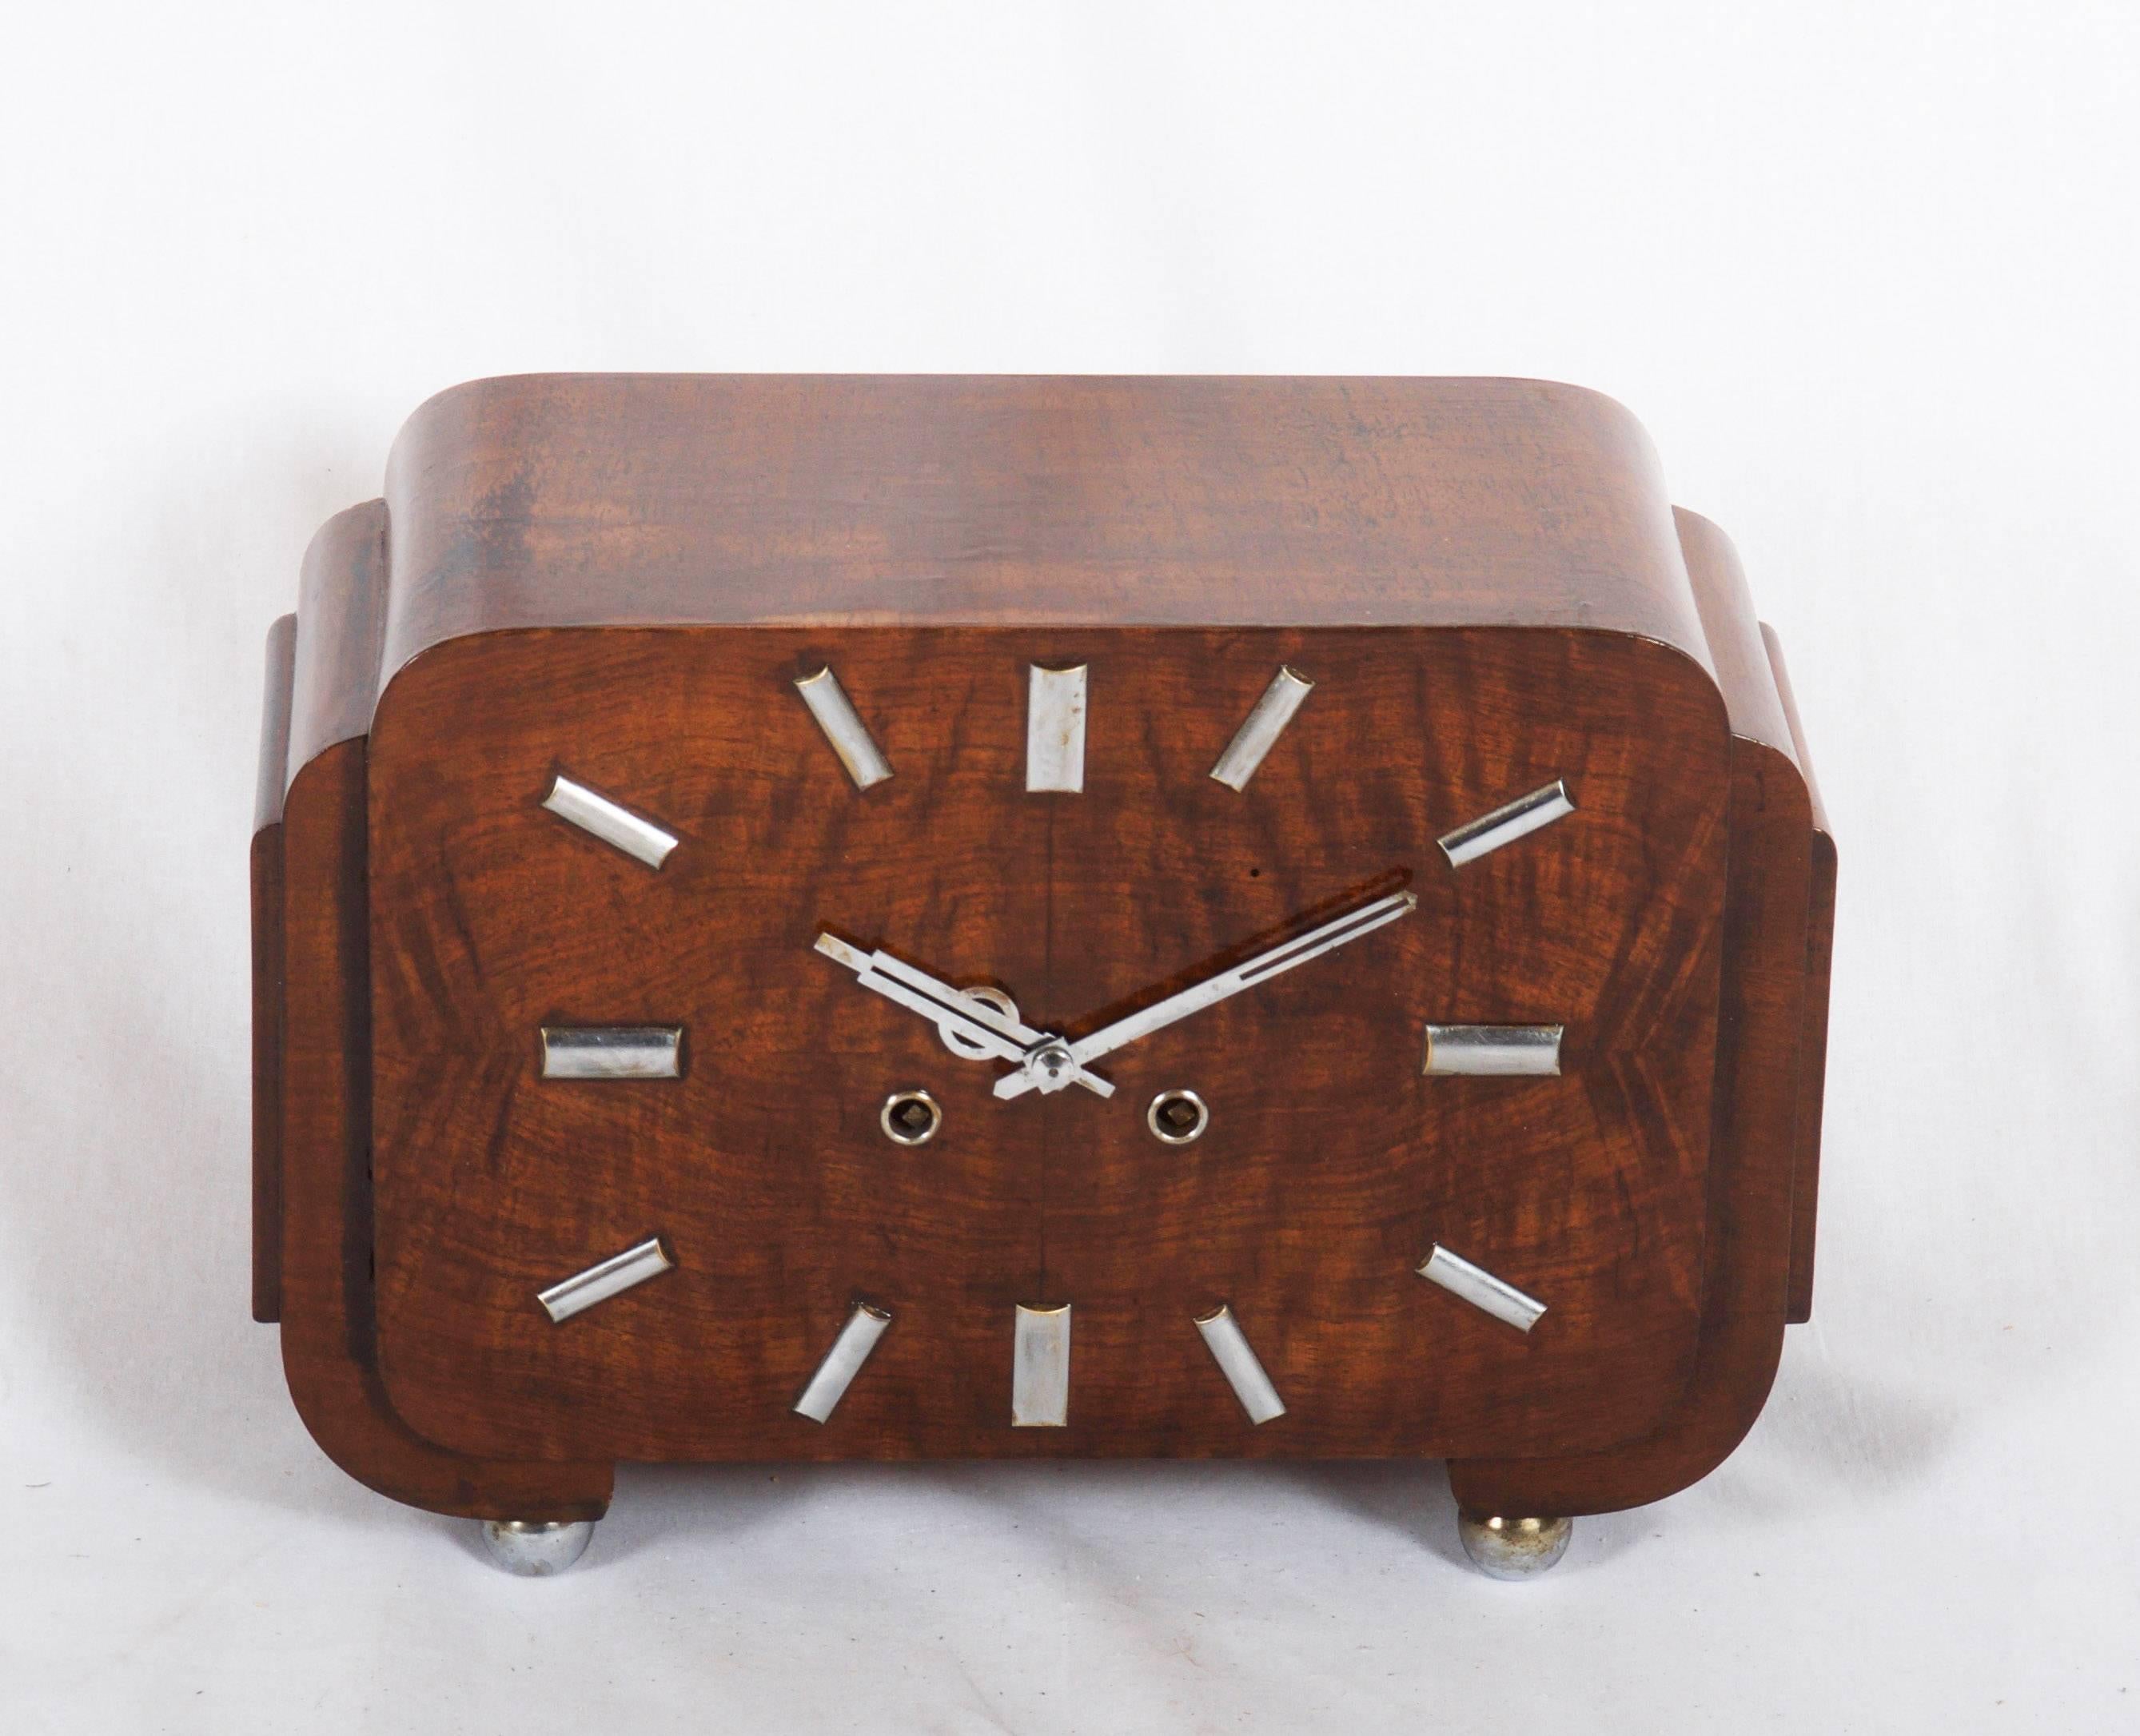 Original condition, perfect working
Softwood covered with walnut veneer
attributed to Kienzle.